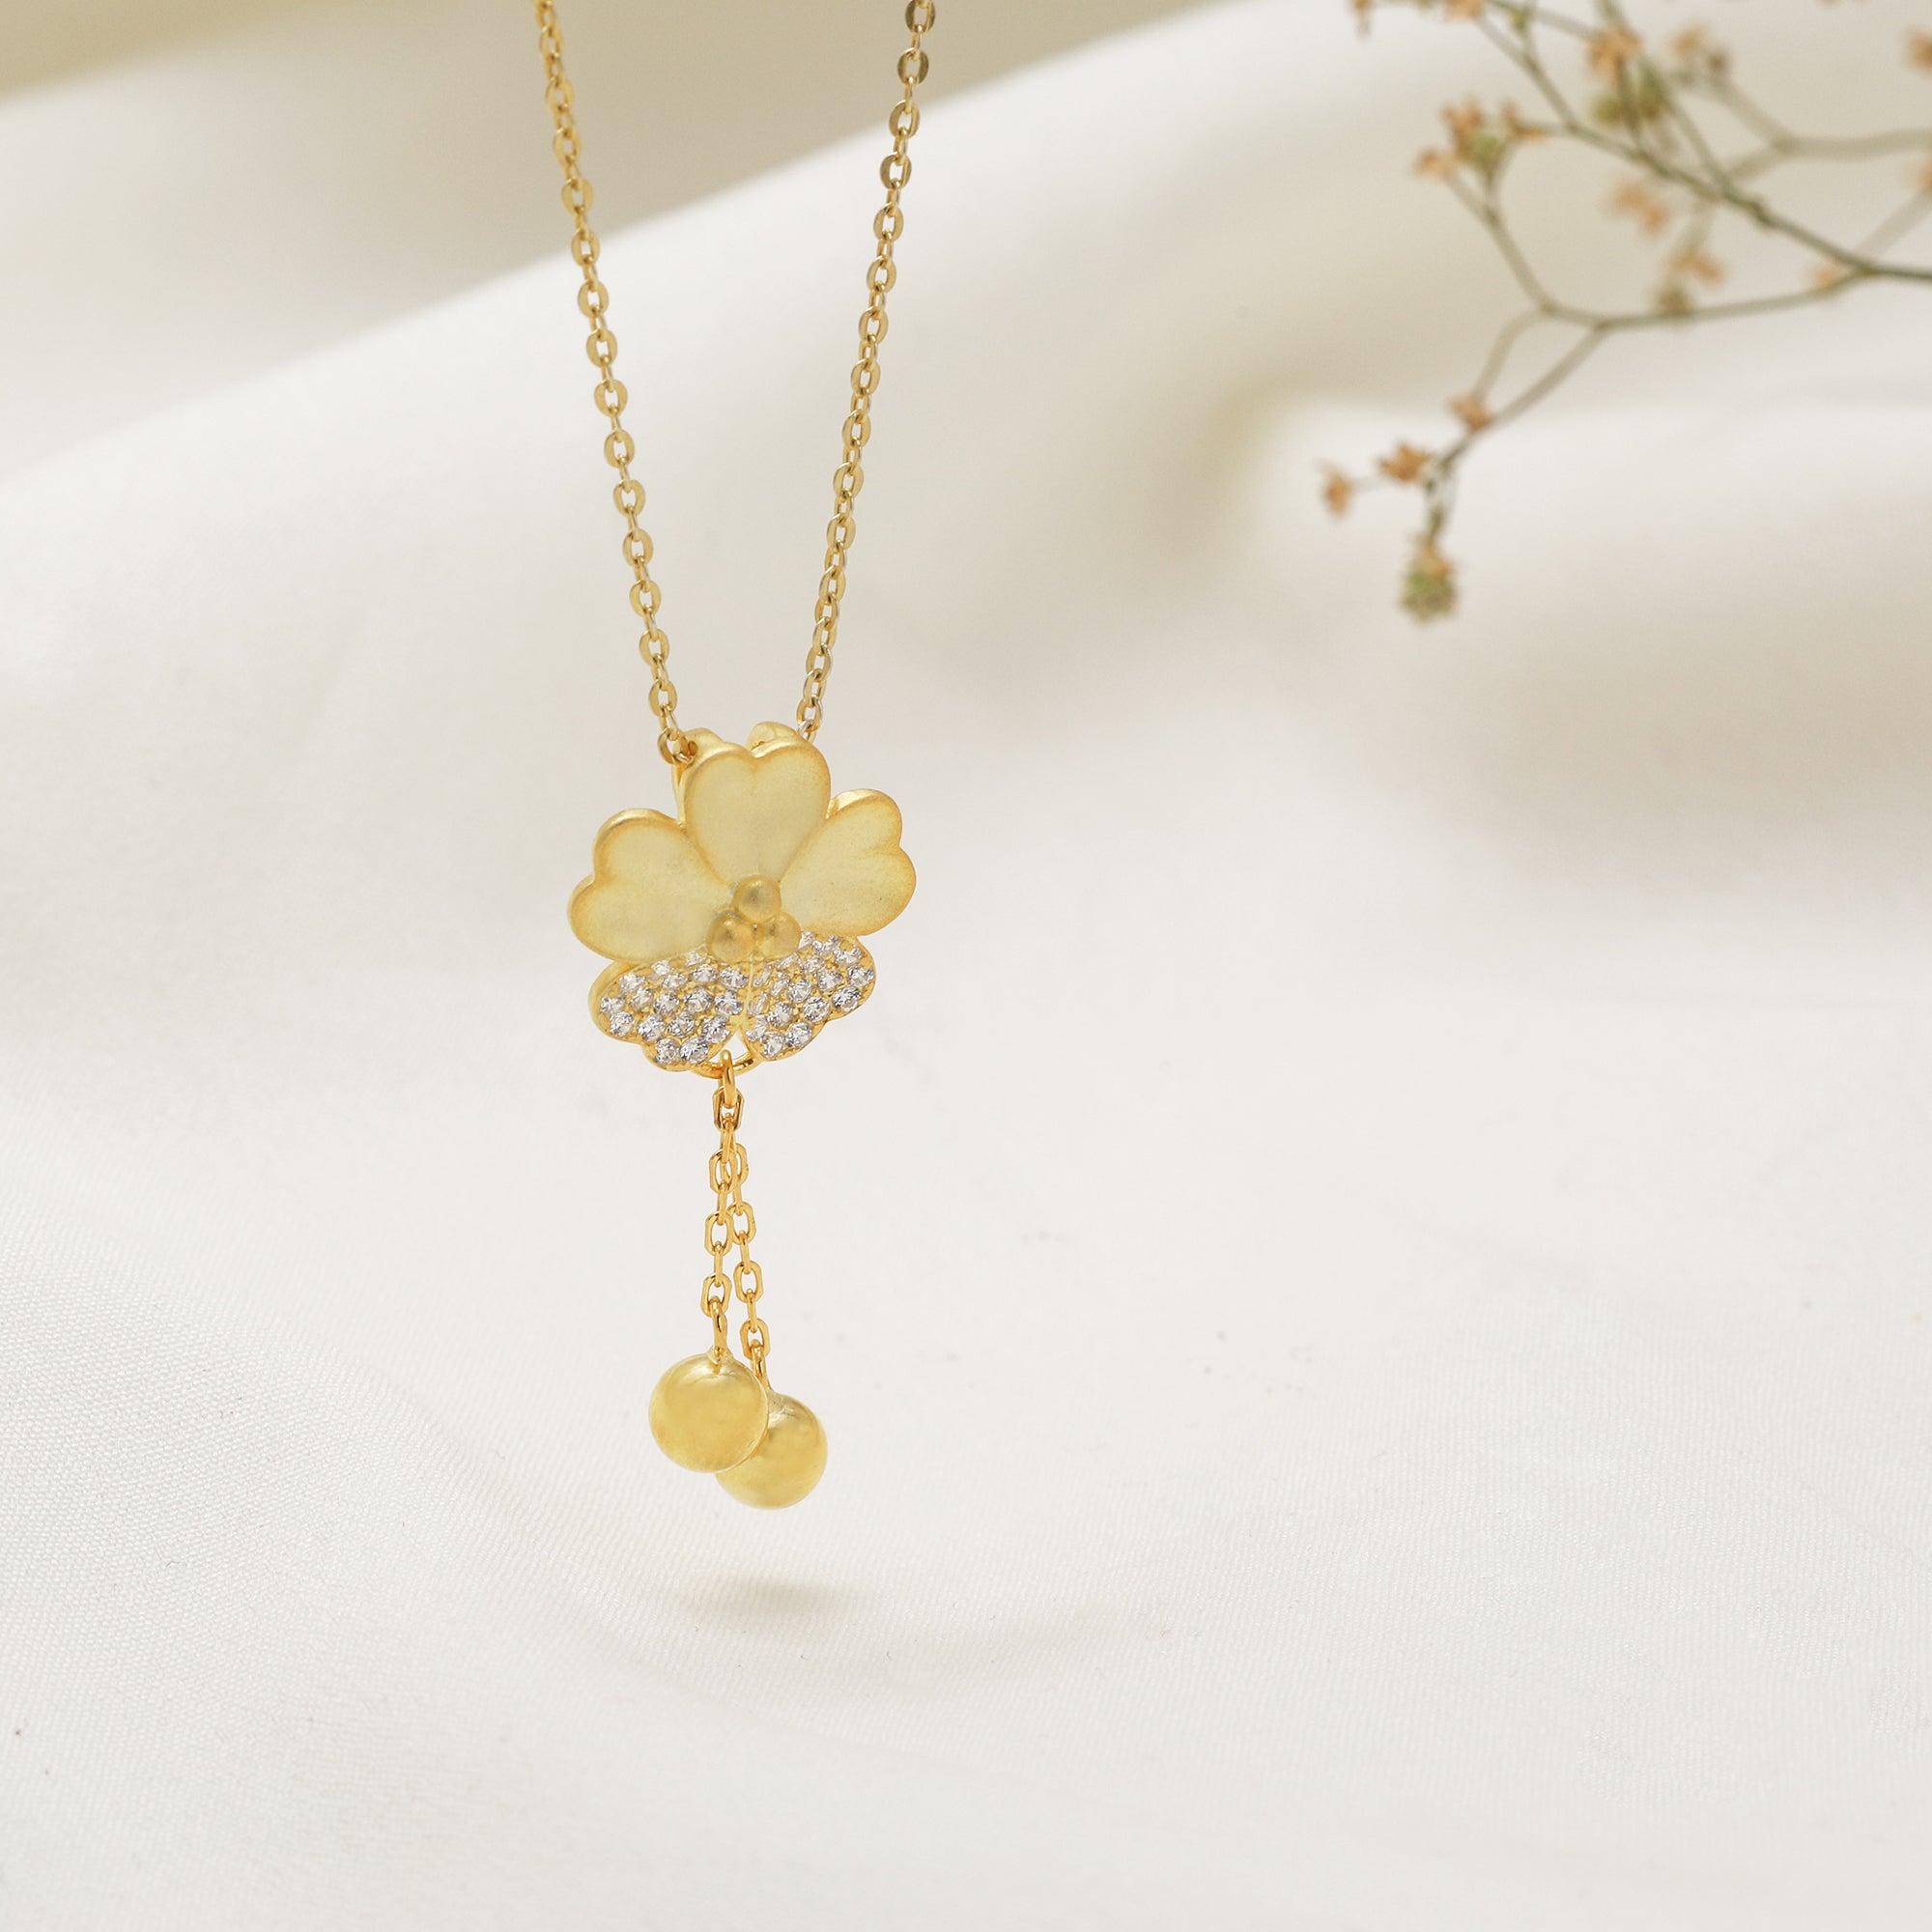 Genuine 18K gold solid clover necklace chain, stamped Au750, 75% of go –  Spainjewelry